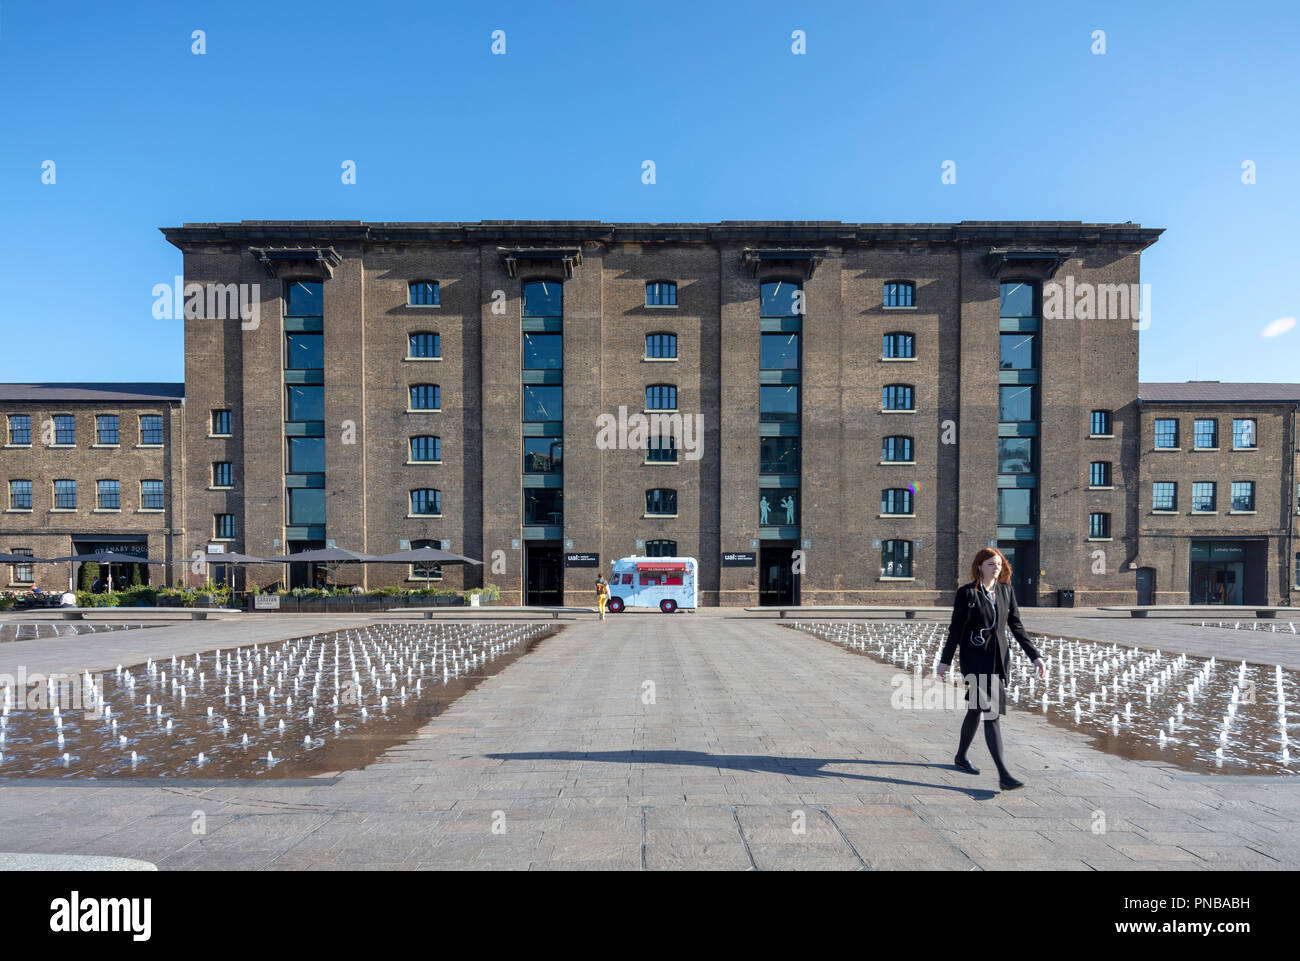 Central St Martins University of the Arts London campus, Grenier Square, Kings Cross, Londres, Angleterre, Royaume-Uni Banque D'Images